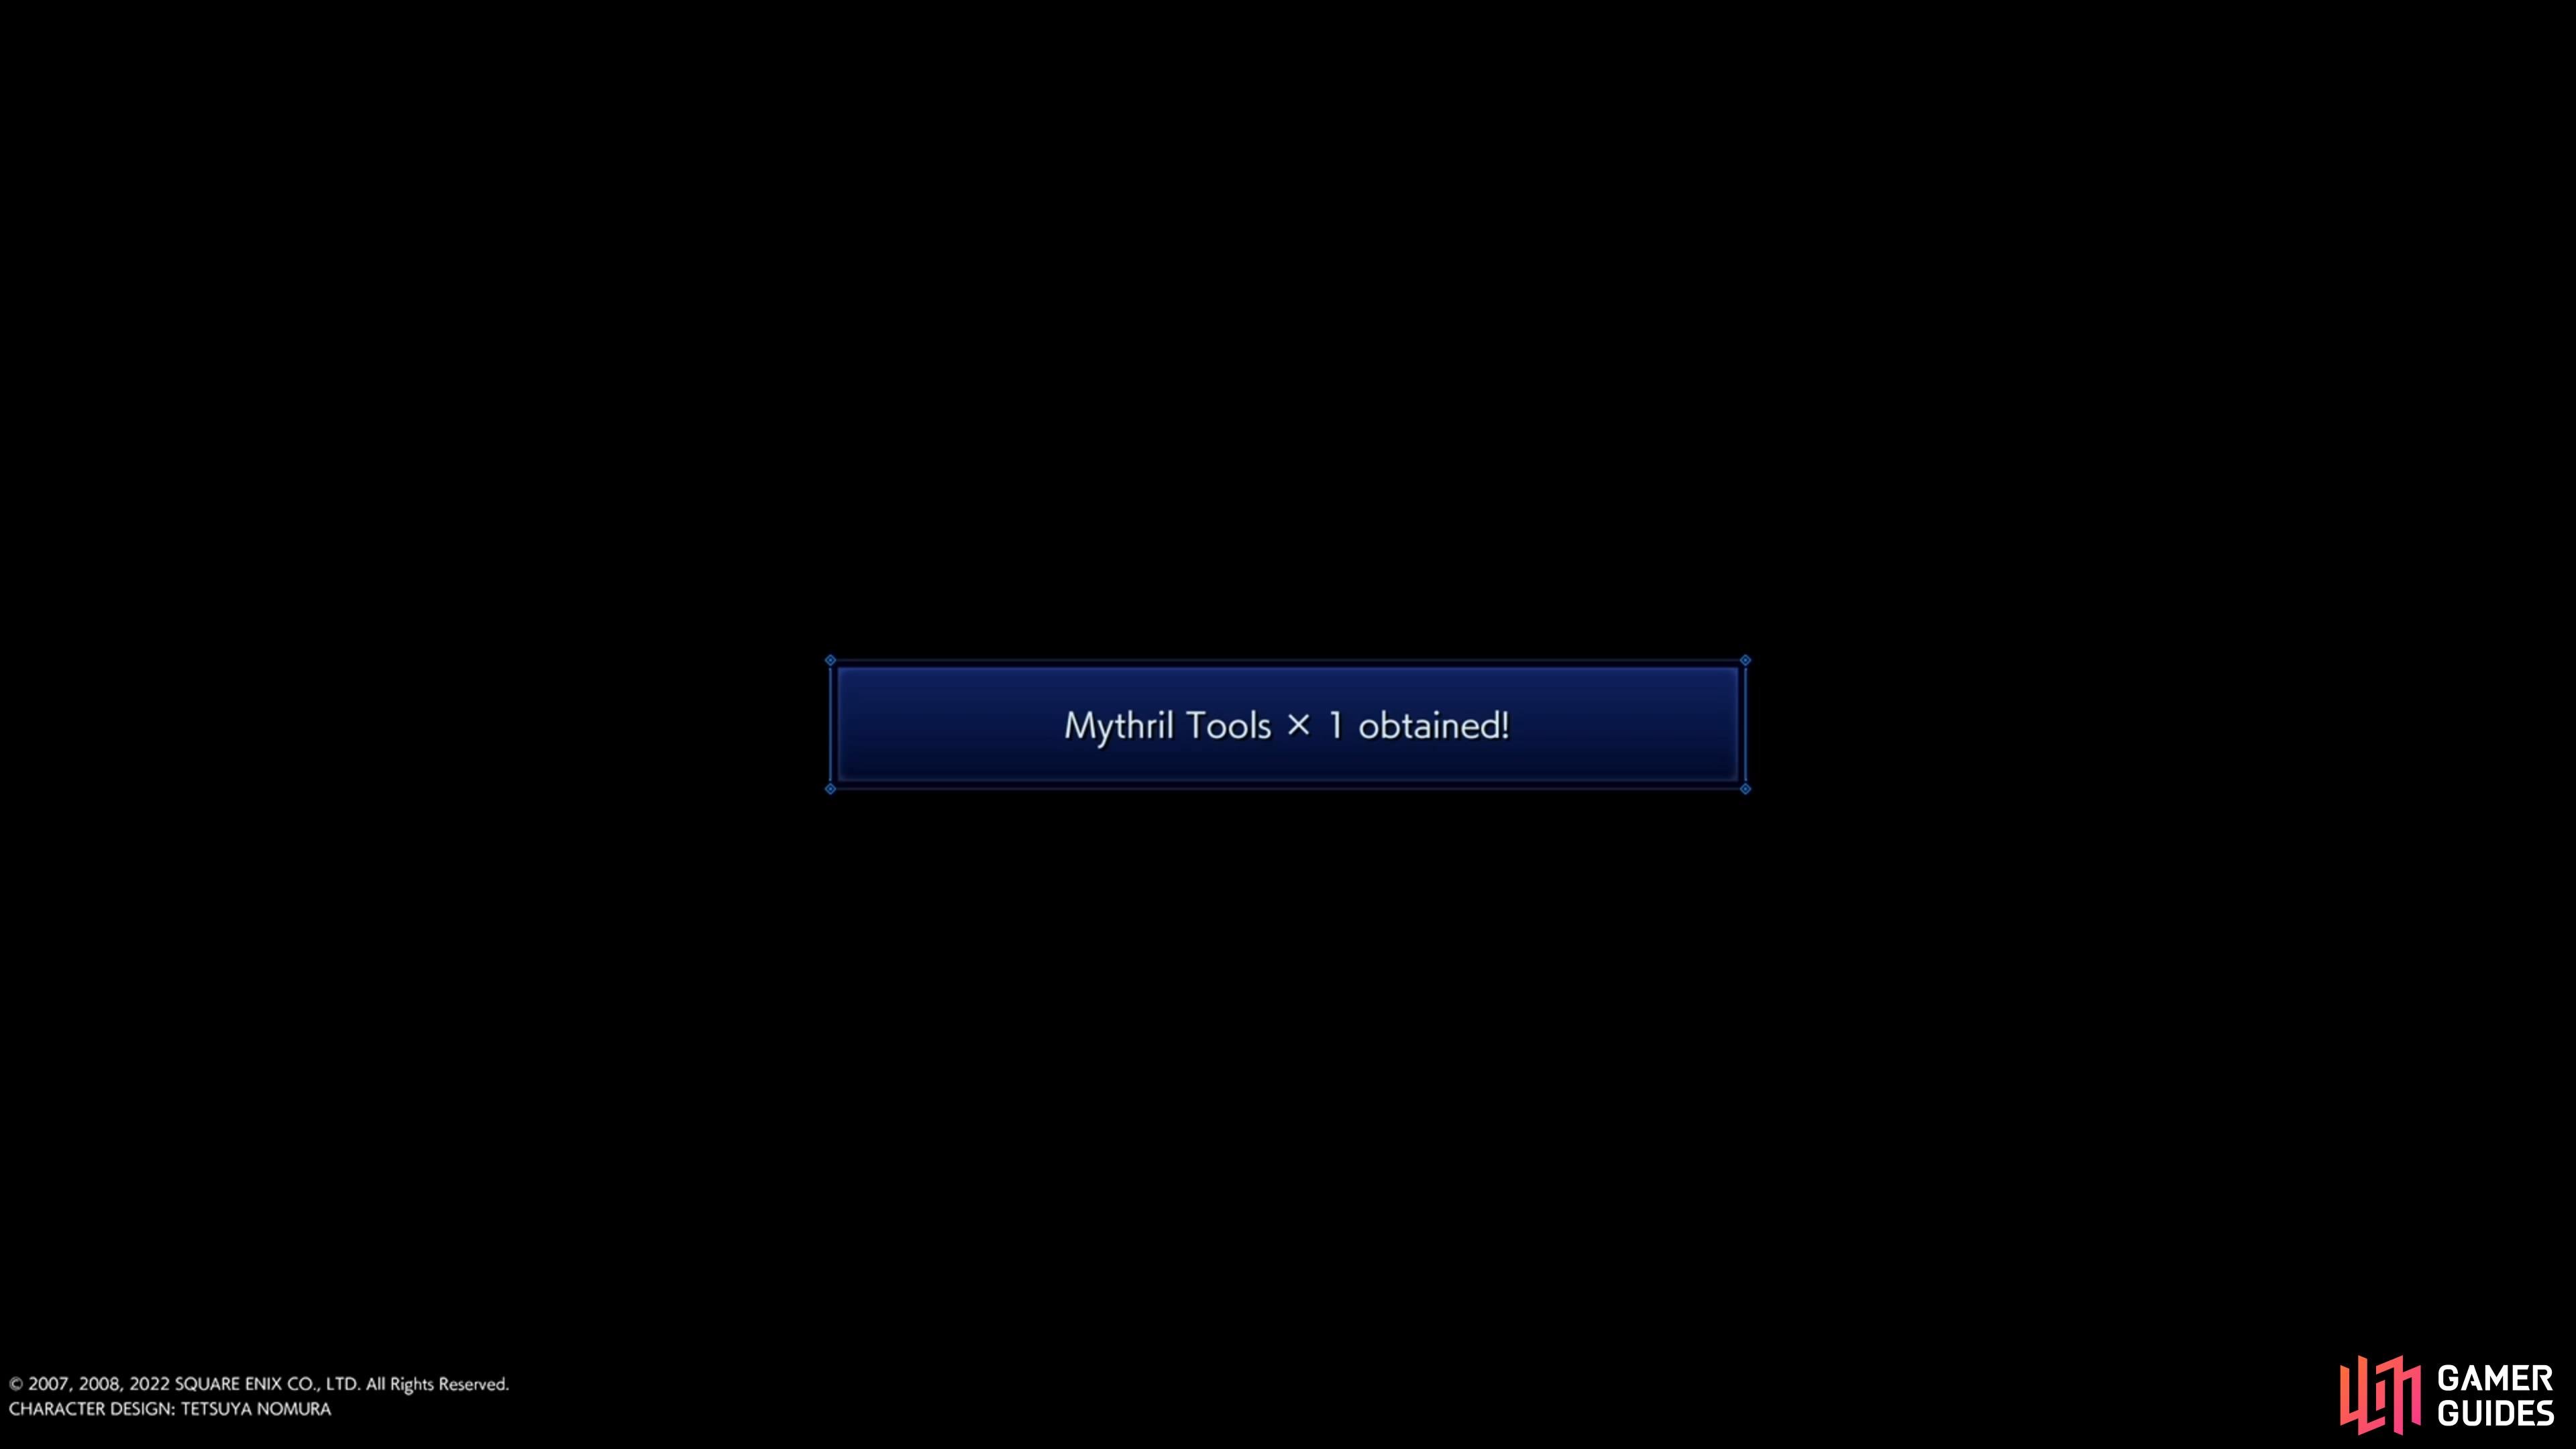 Don't forget to return to the Researcher to get the !Mythril Tools key item